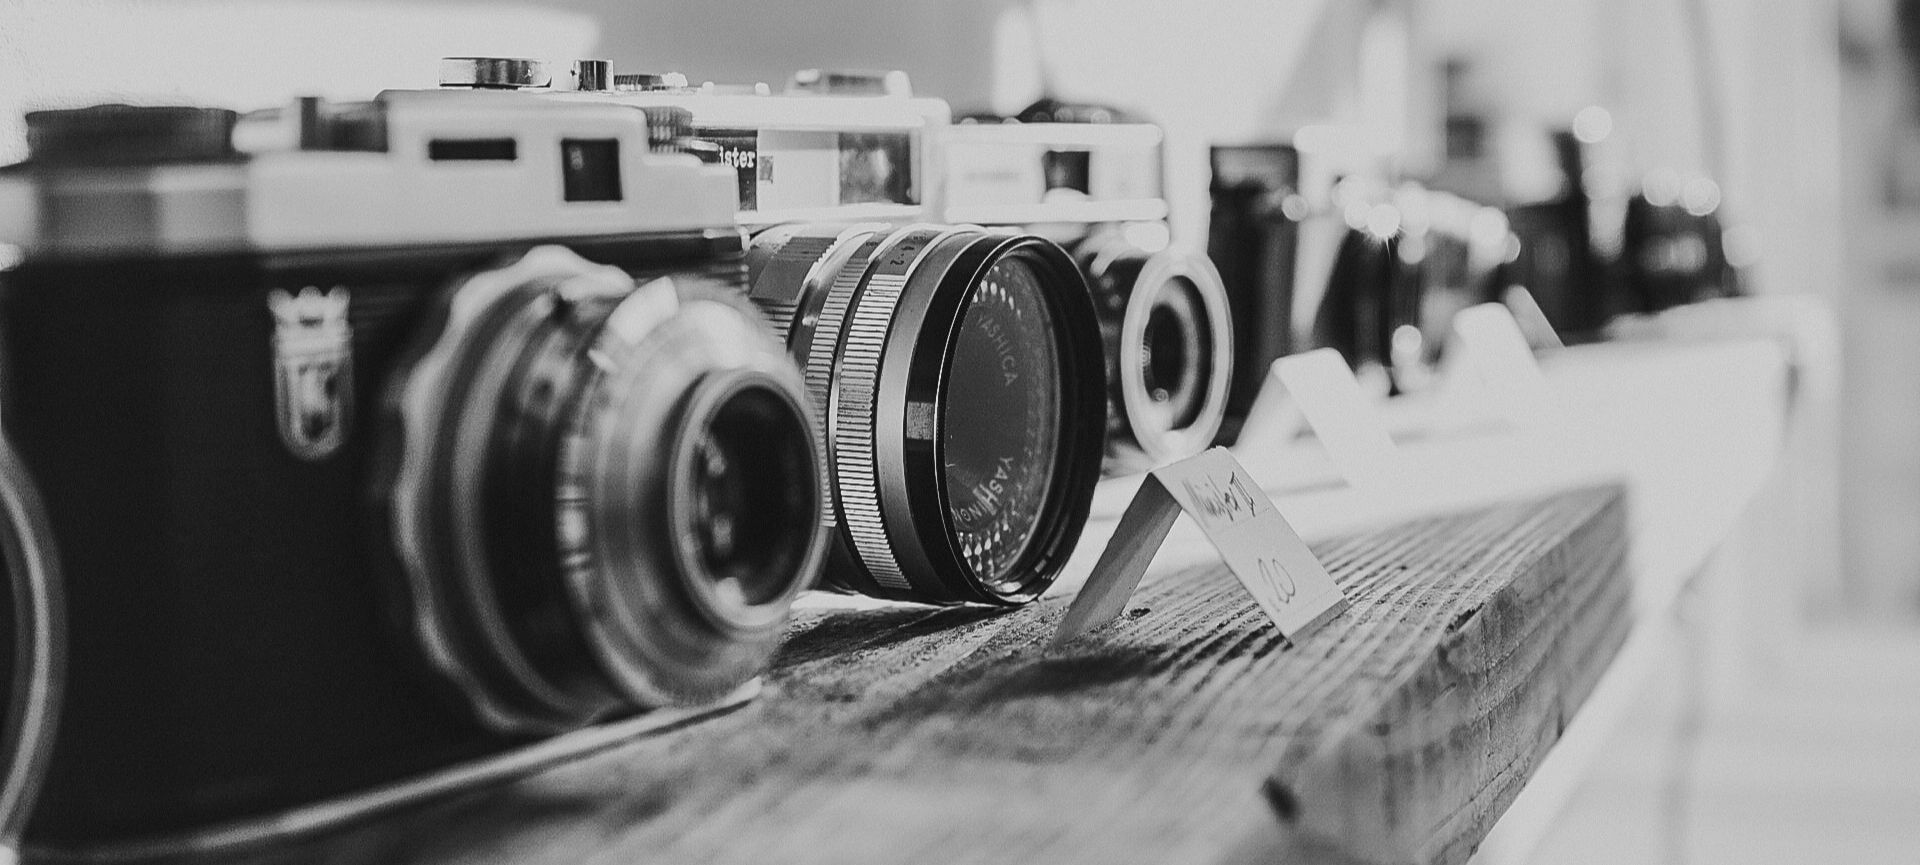 Line of vintage cameras on a wooden shelf in black and white